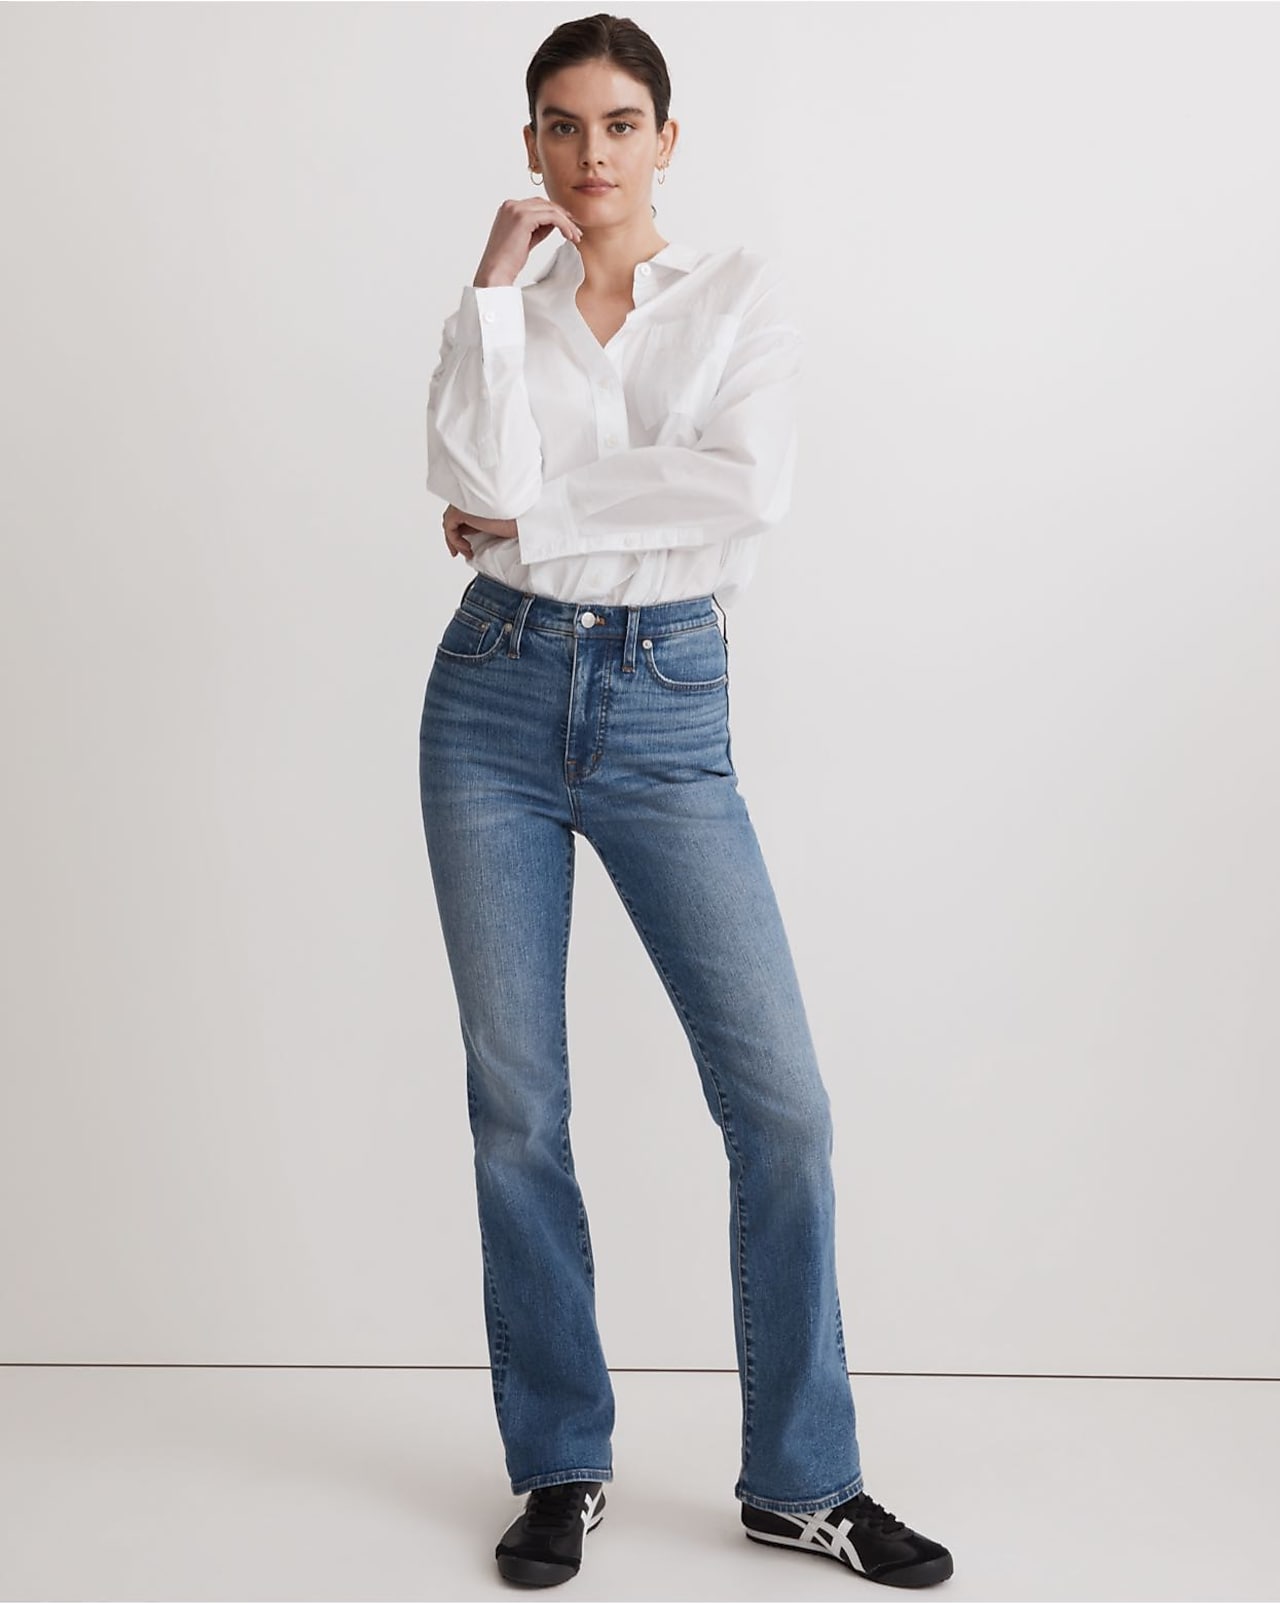 The Curvy Perfect Vintage Jean in Myers Wash: Instacozy Edition